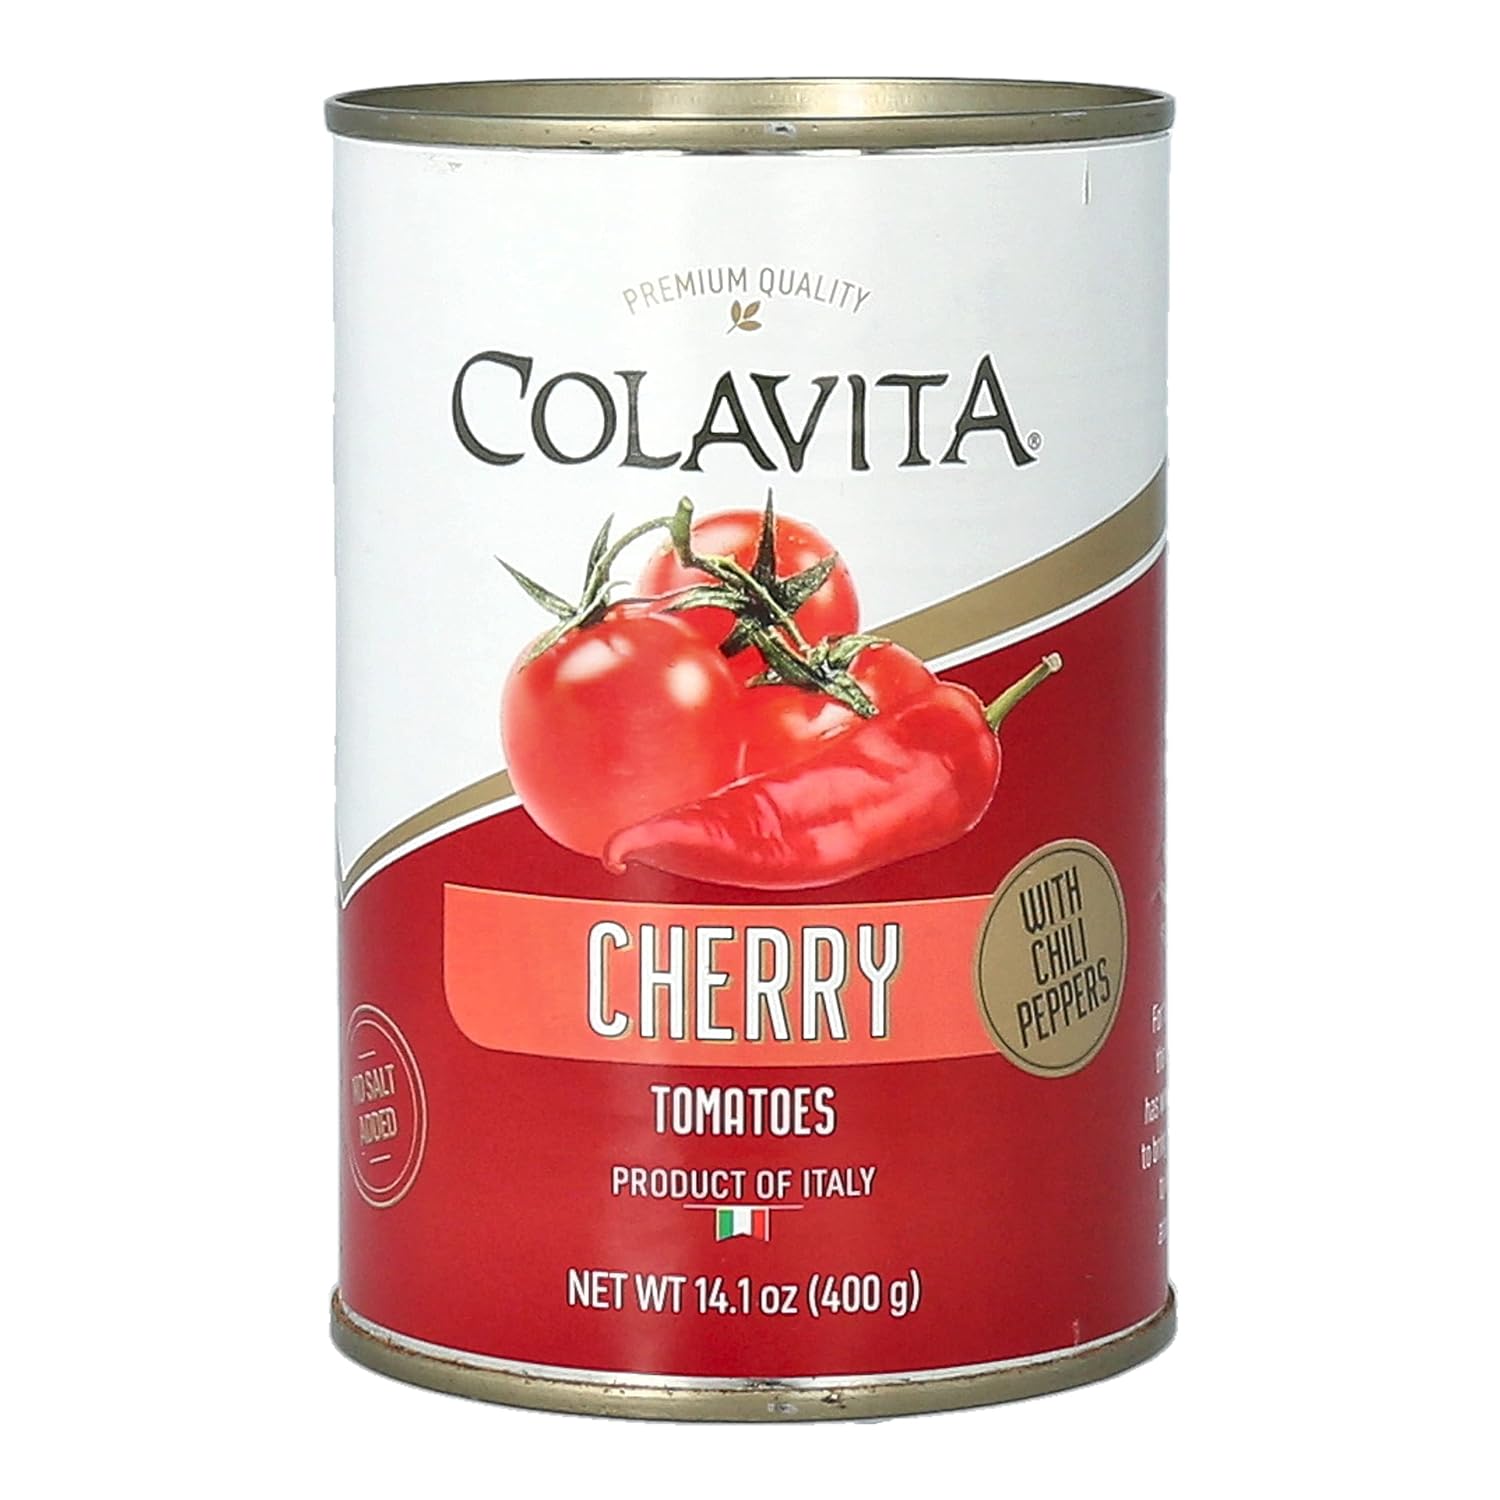 Colavita Canned Tomatoes - Cherry with Chili Peppers, 14.1oz Can